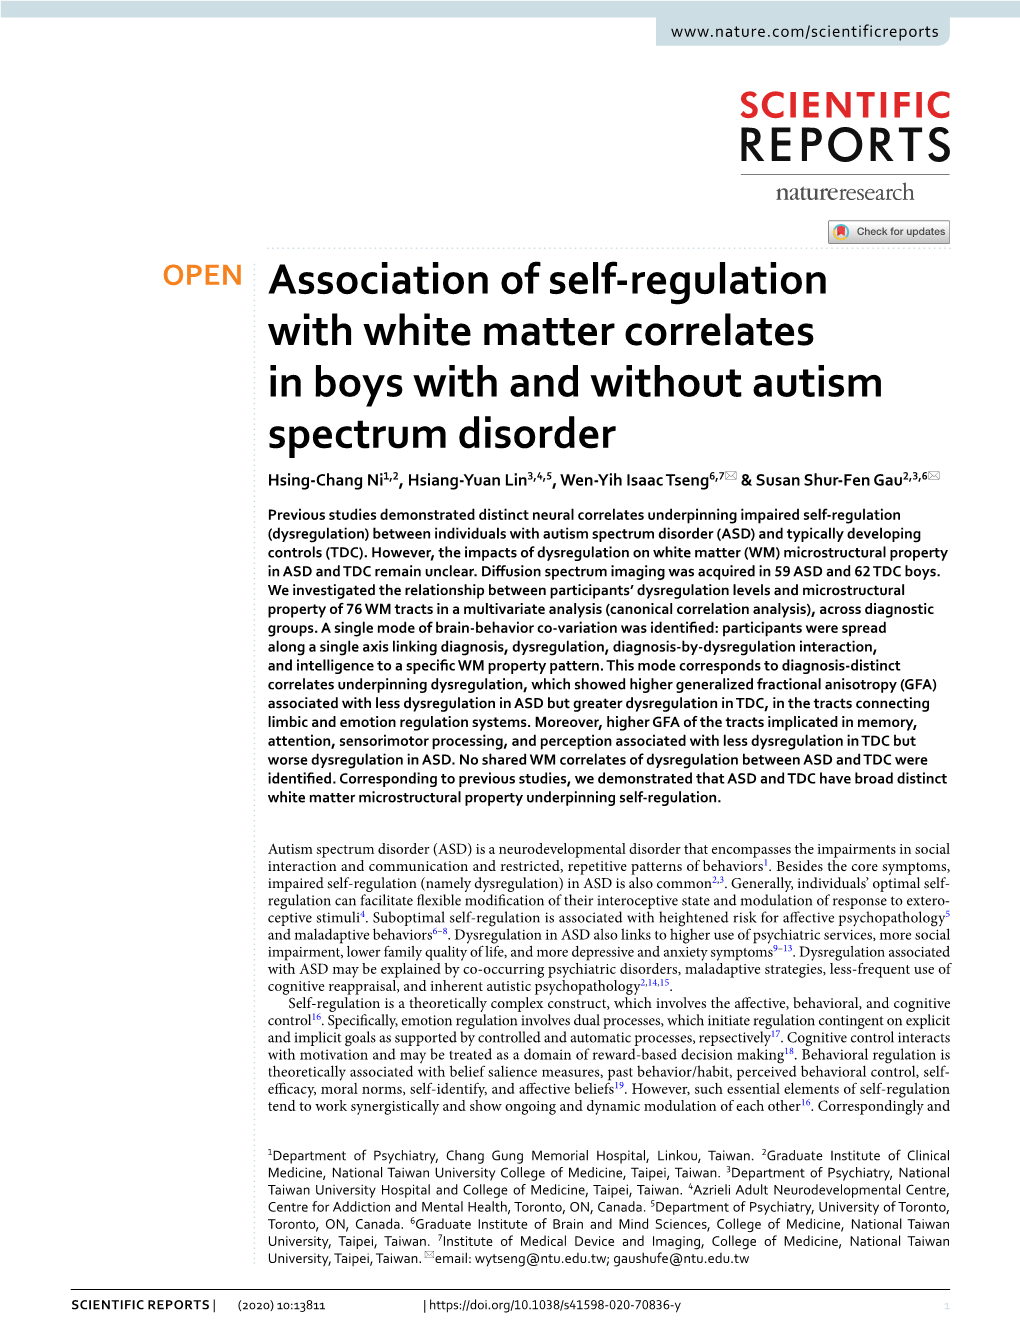 Association of Self-Regulation with White Matter Correlates in Boys With